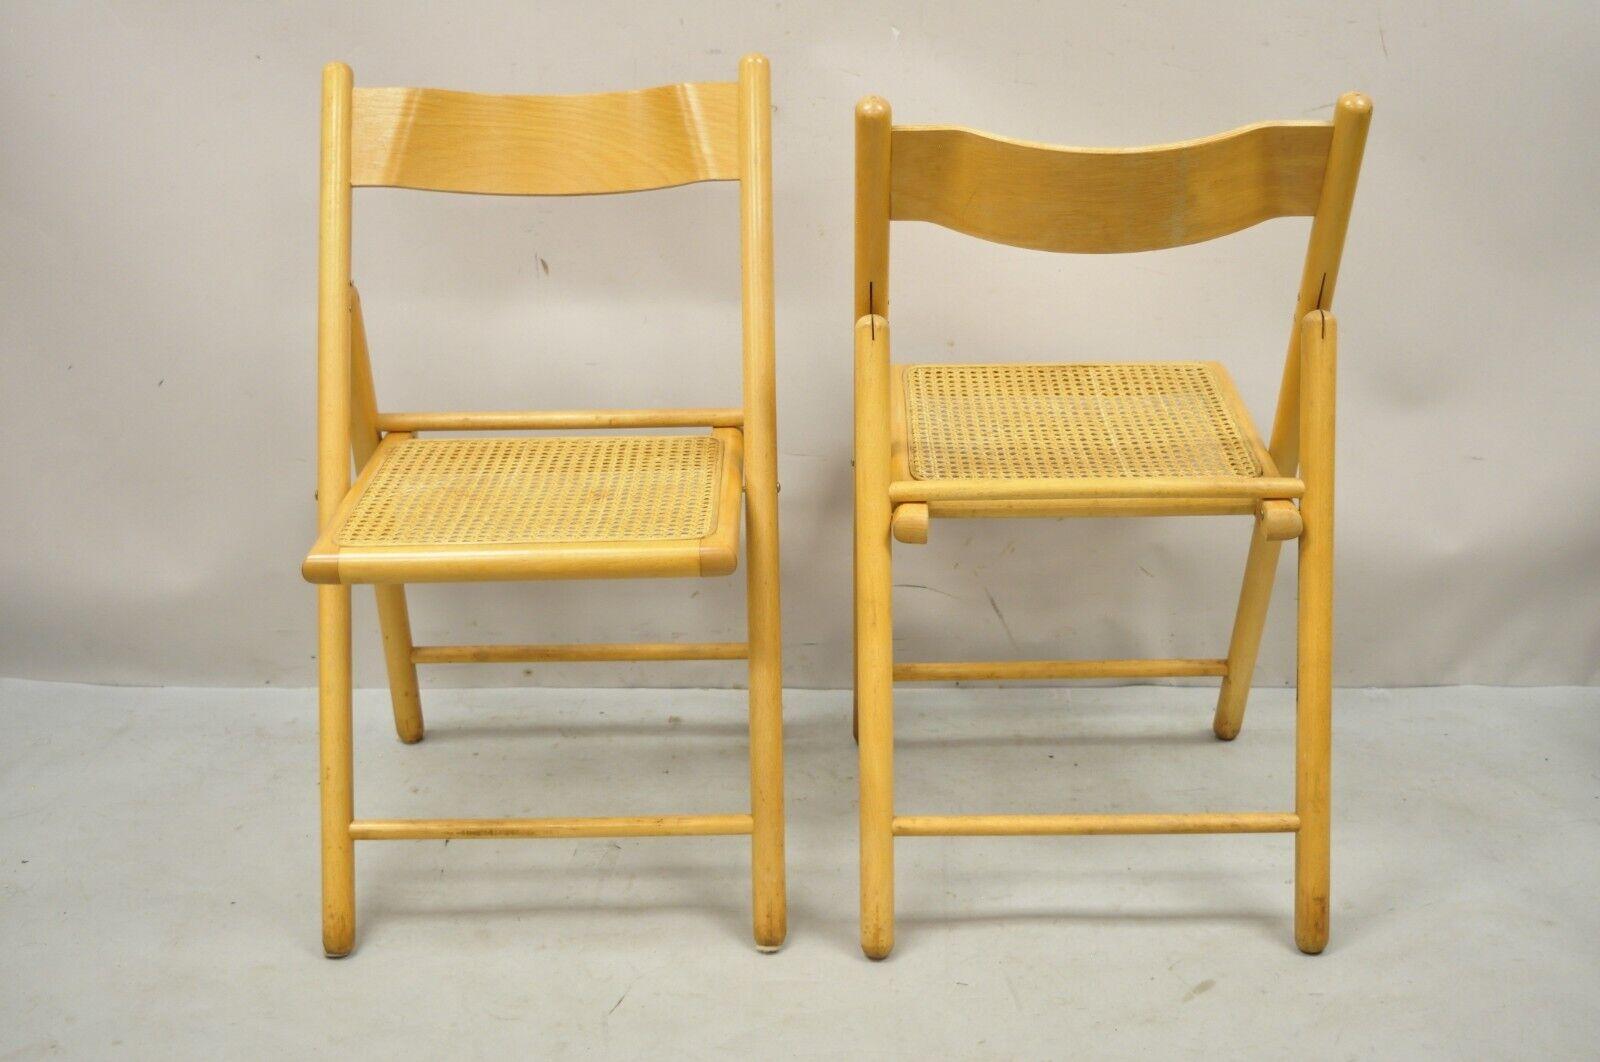 Vintage Habitat England Bentwood Cane Rattan Folding Chairs - a Pair For Sale 1